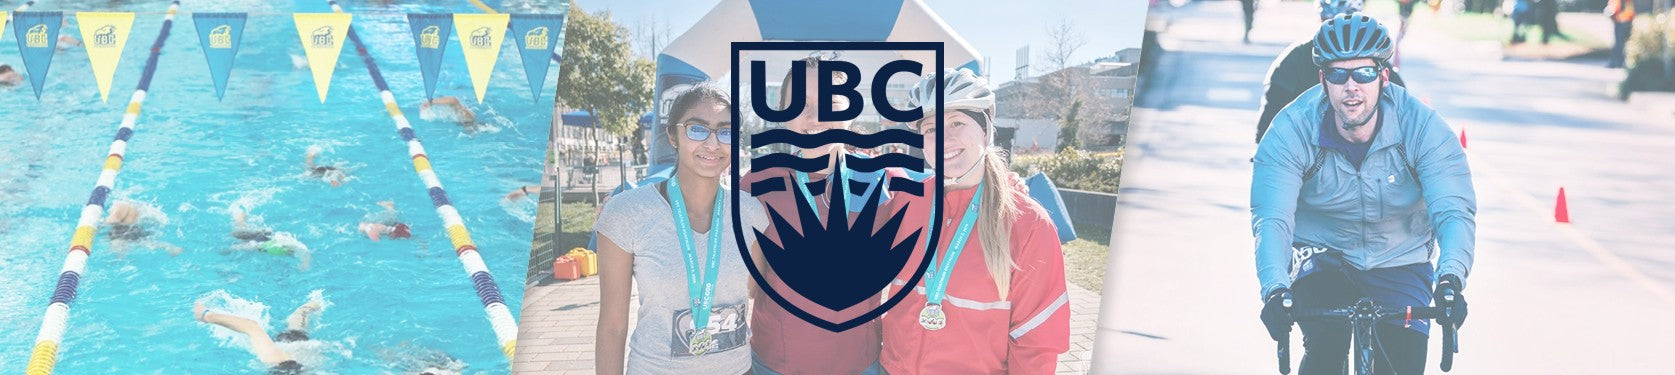 UBC TriDu Package Pick up Expo - February 25th, 2023